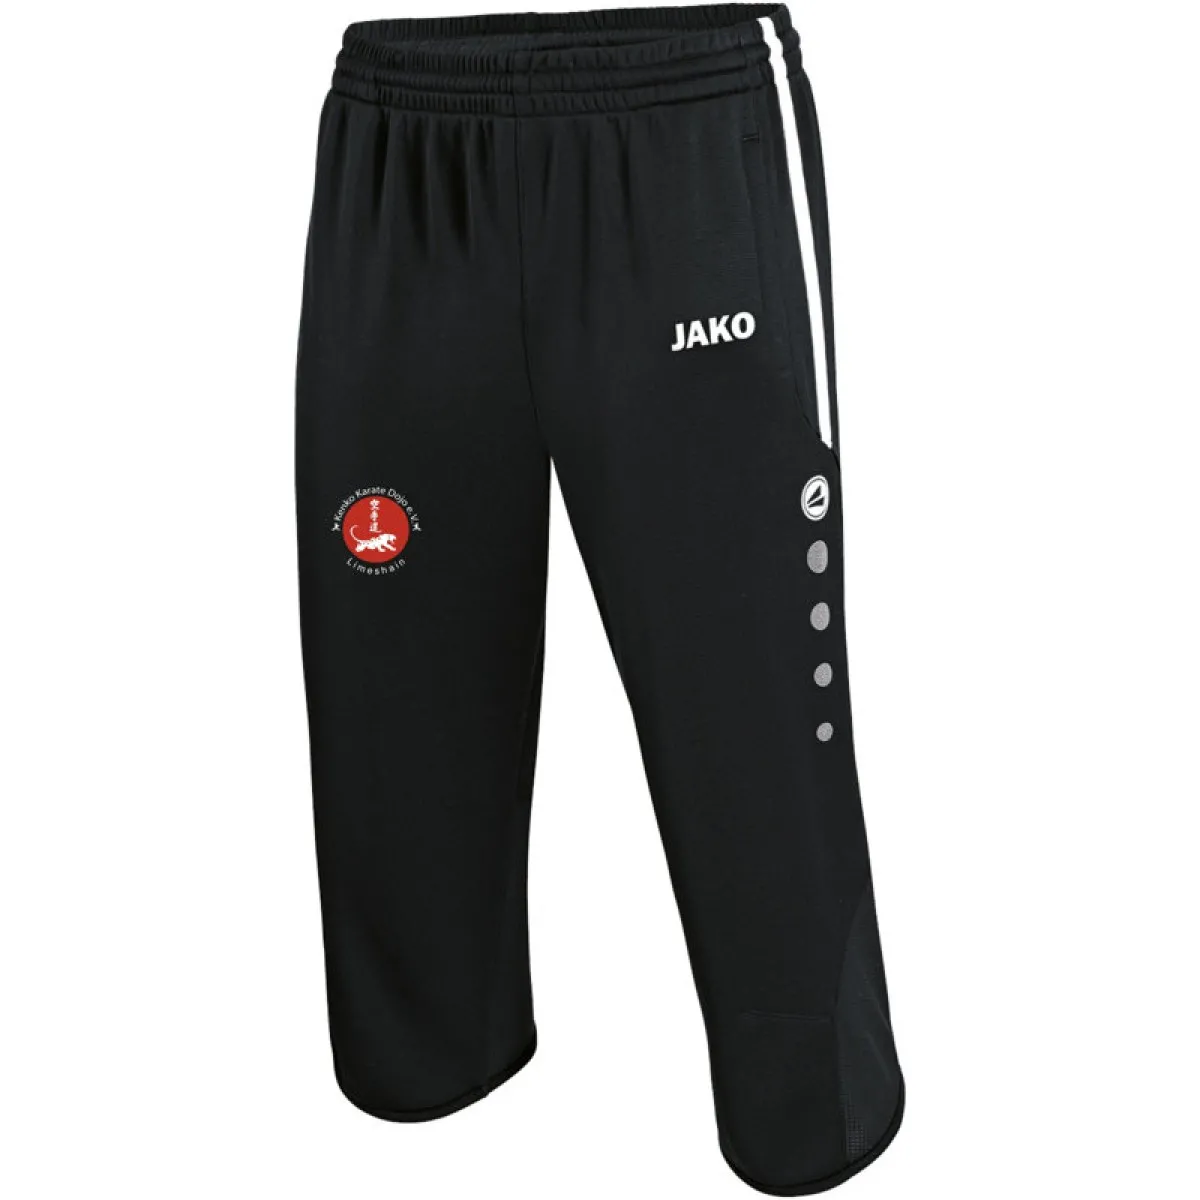 Jako training trousers / polyester trousers Competition